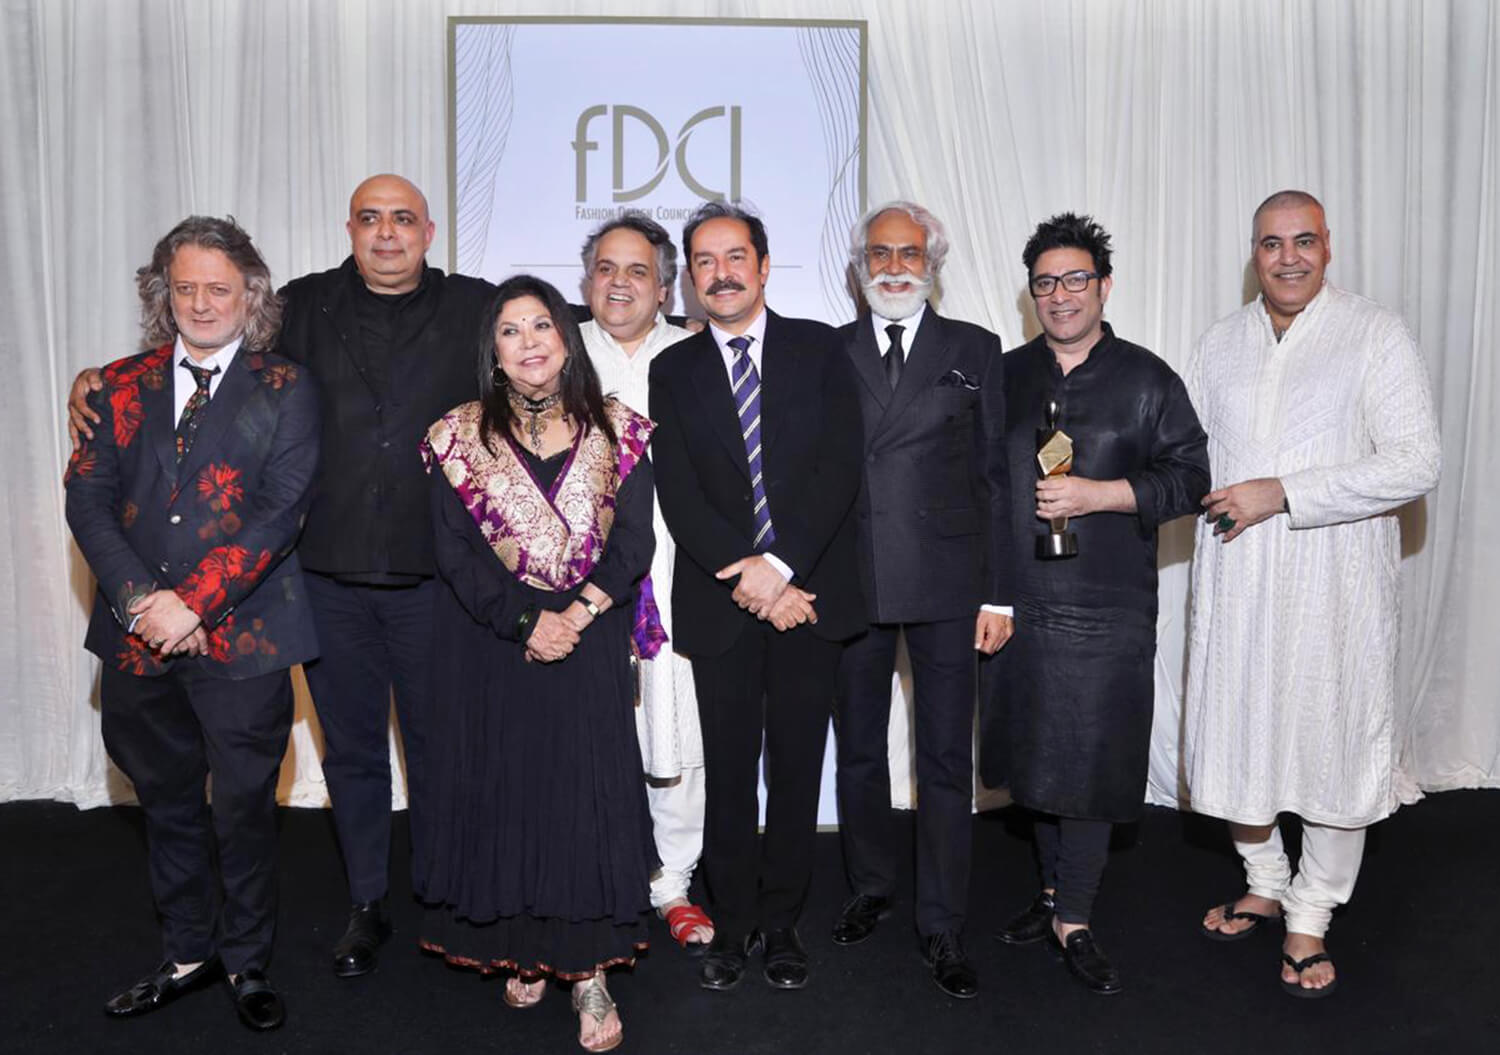 A first for designers, FDCI hall of fame | Couture hall of fame